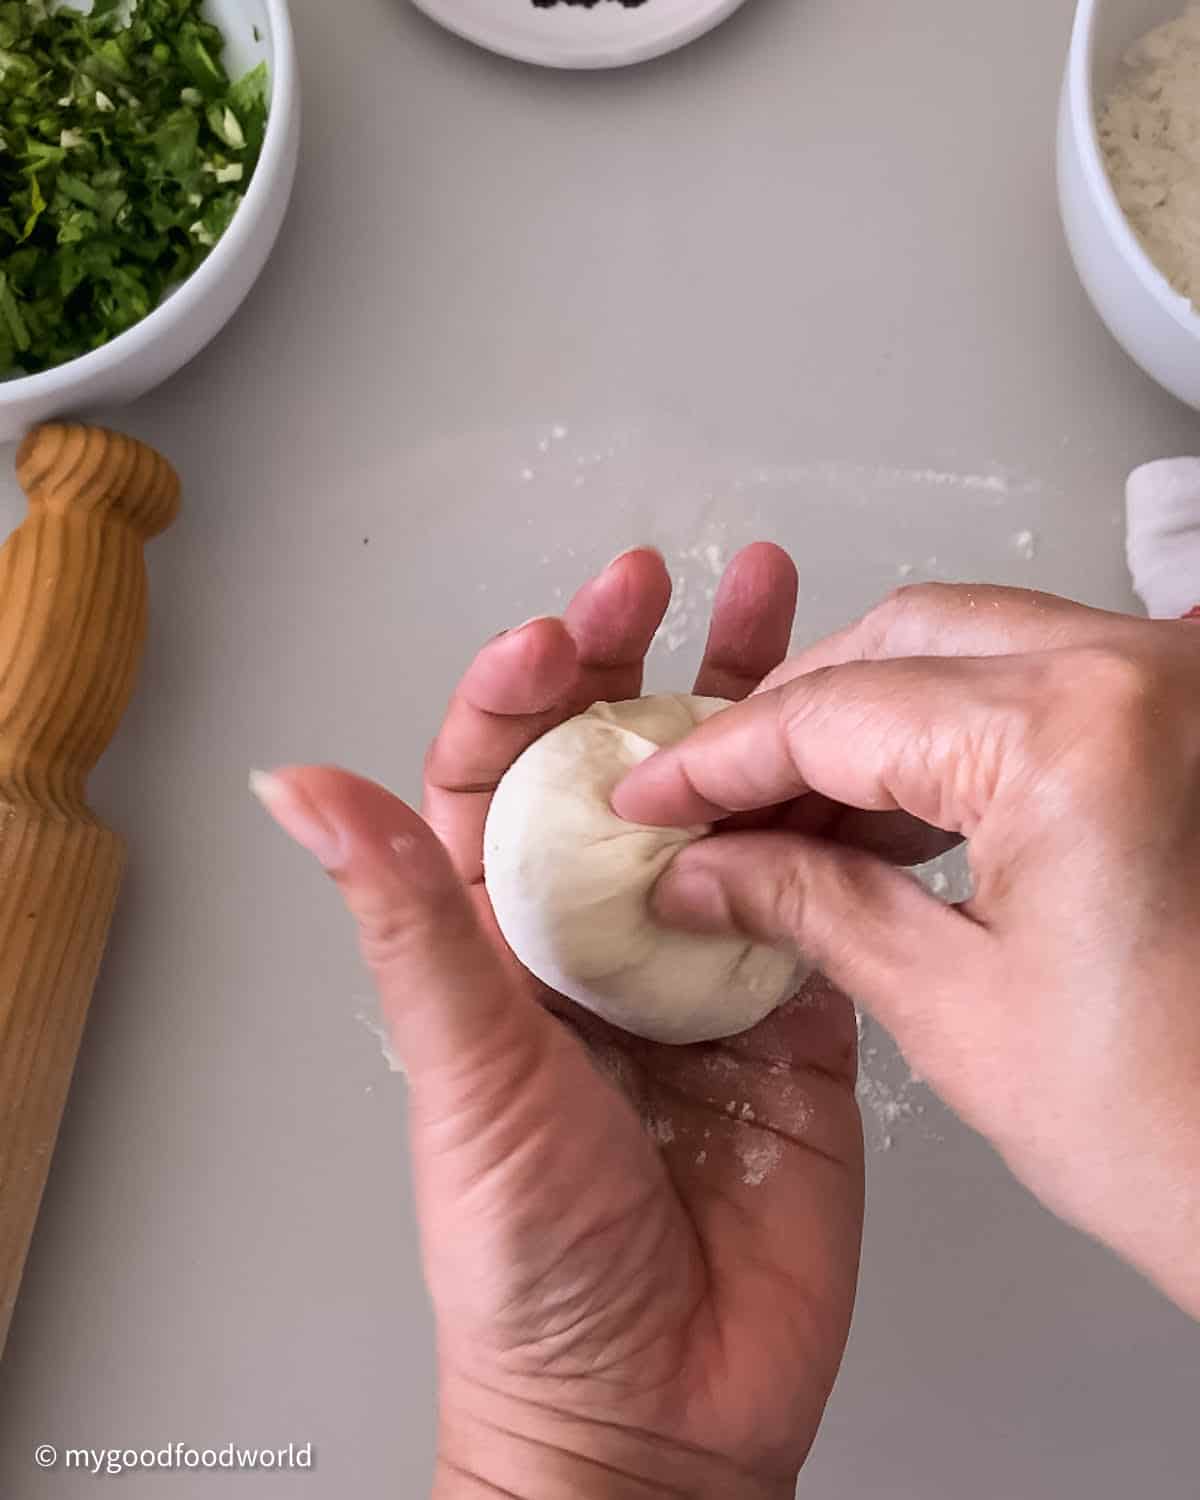 A dough ball that has been stuffed with a filling is being pinched to bring the ends together and make a leak-proof dumpling-like shape.